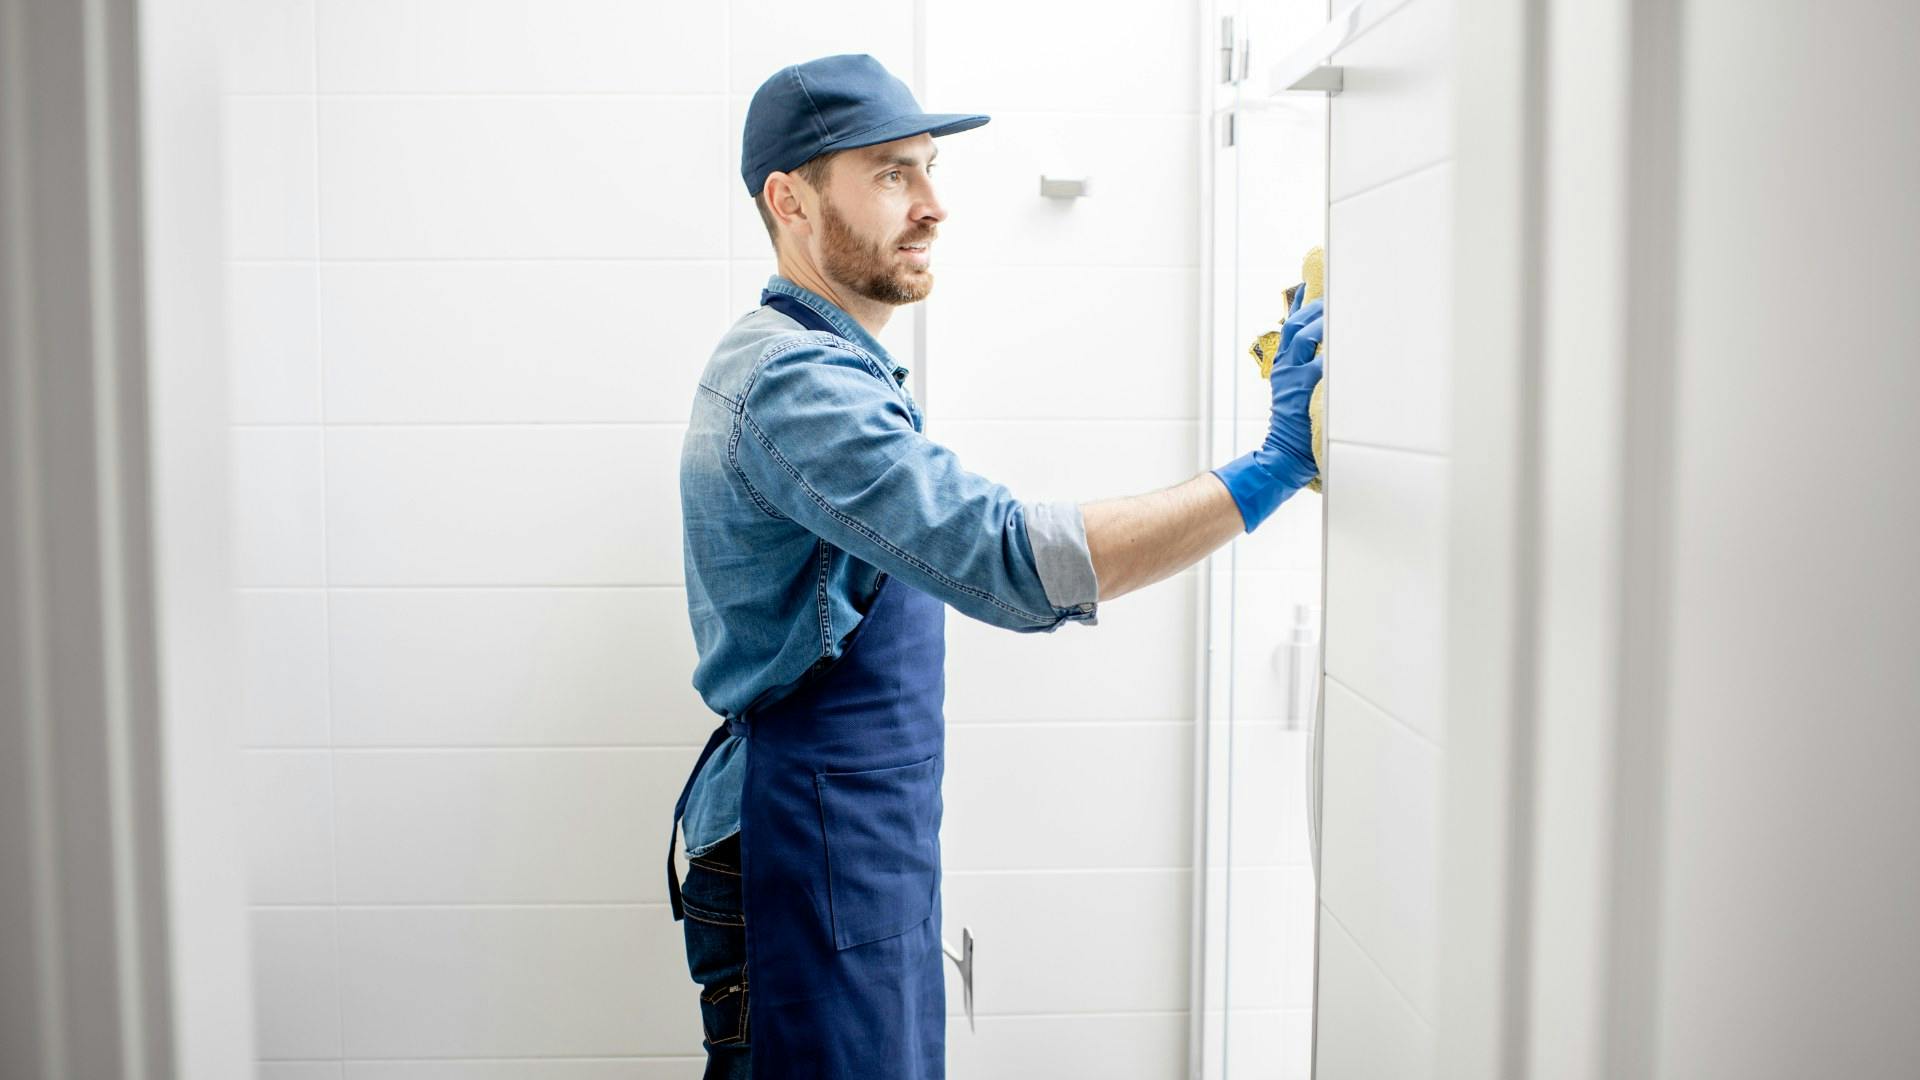 Male cleaning crew member sanitizing walls